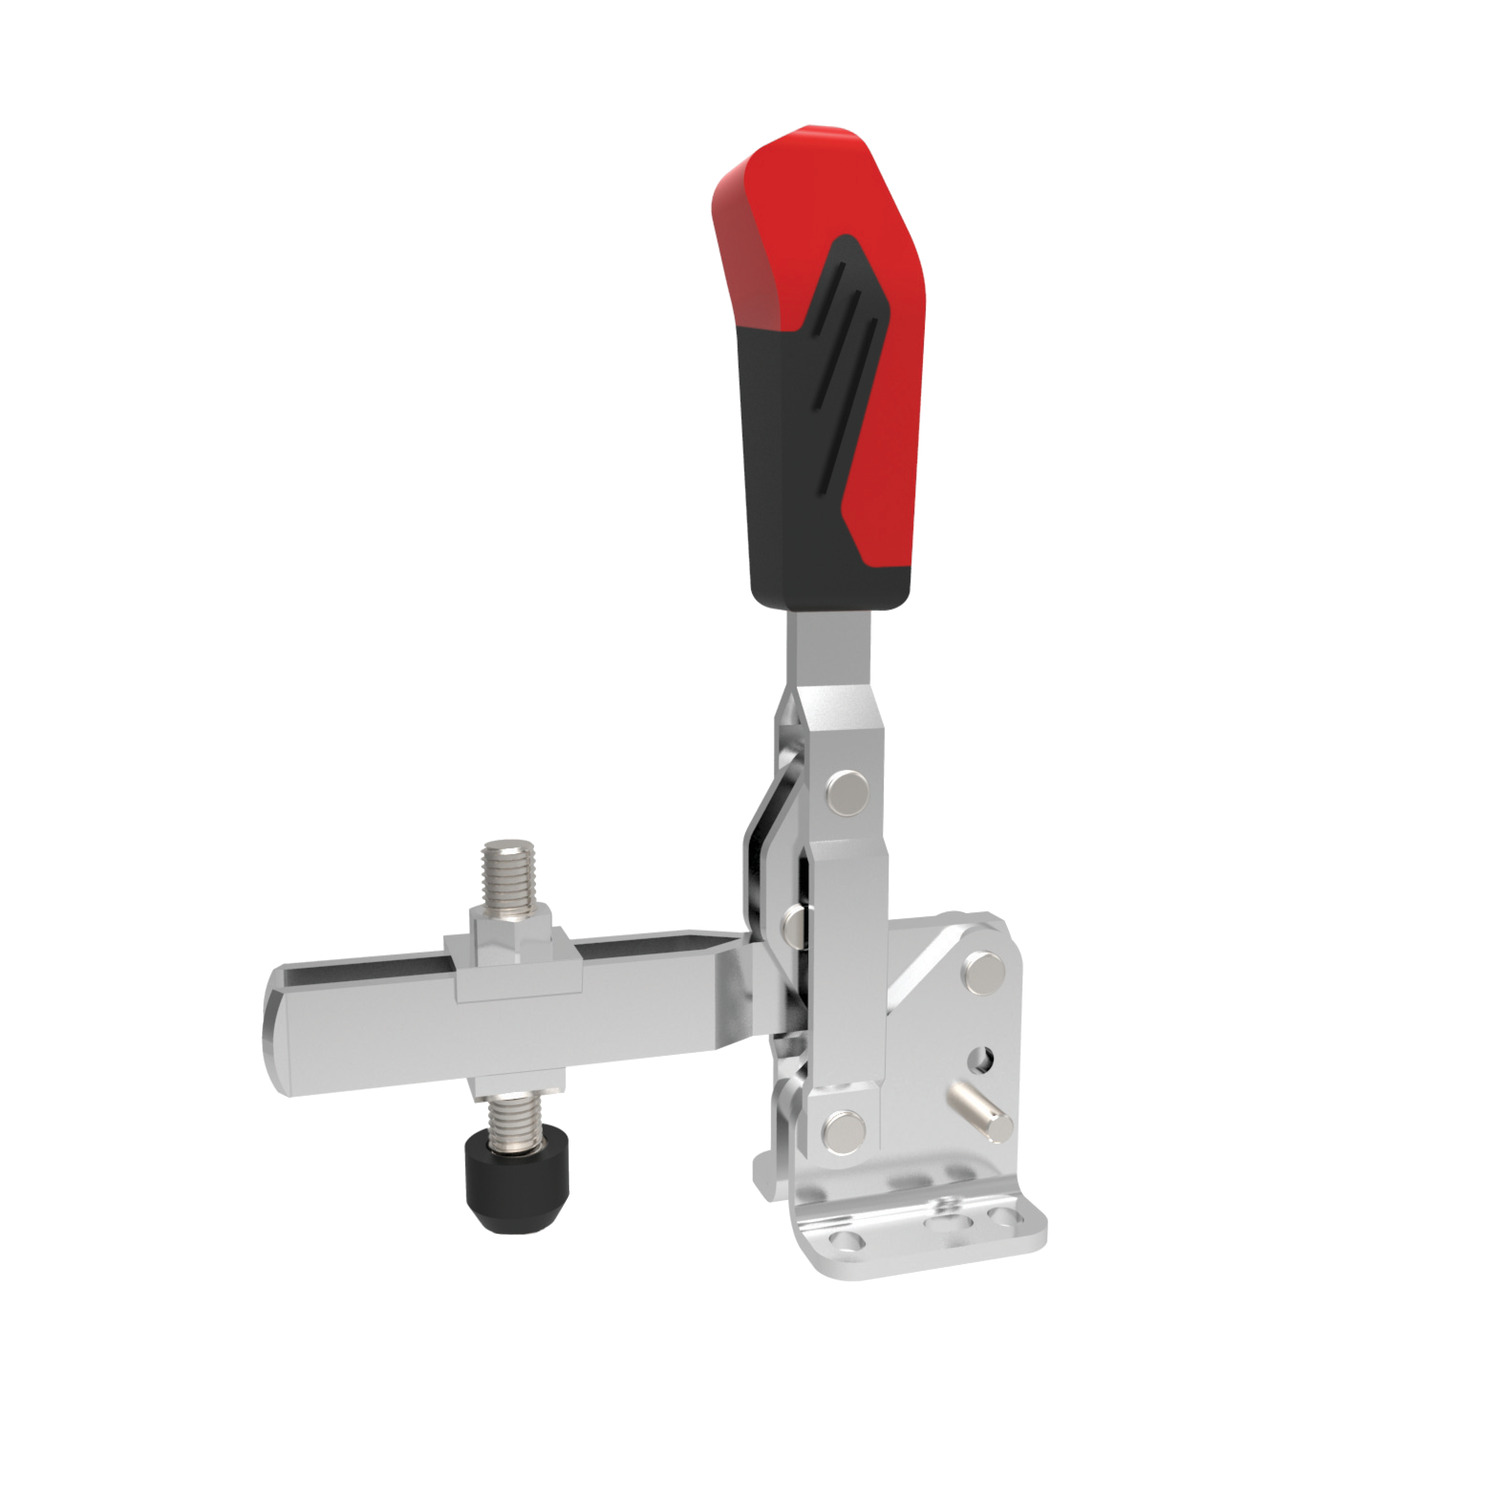 Steel Vertical Acting Toggle Clamps Our range of vertical acting toggle clamps made from zinc-plated and passivated steel or in stainless steel. Bushes are case hardened and greased. Handles are made from oil resistant plastic to ensure easy operation.